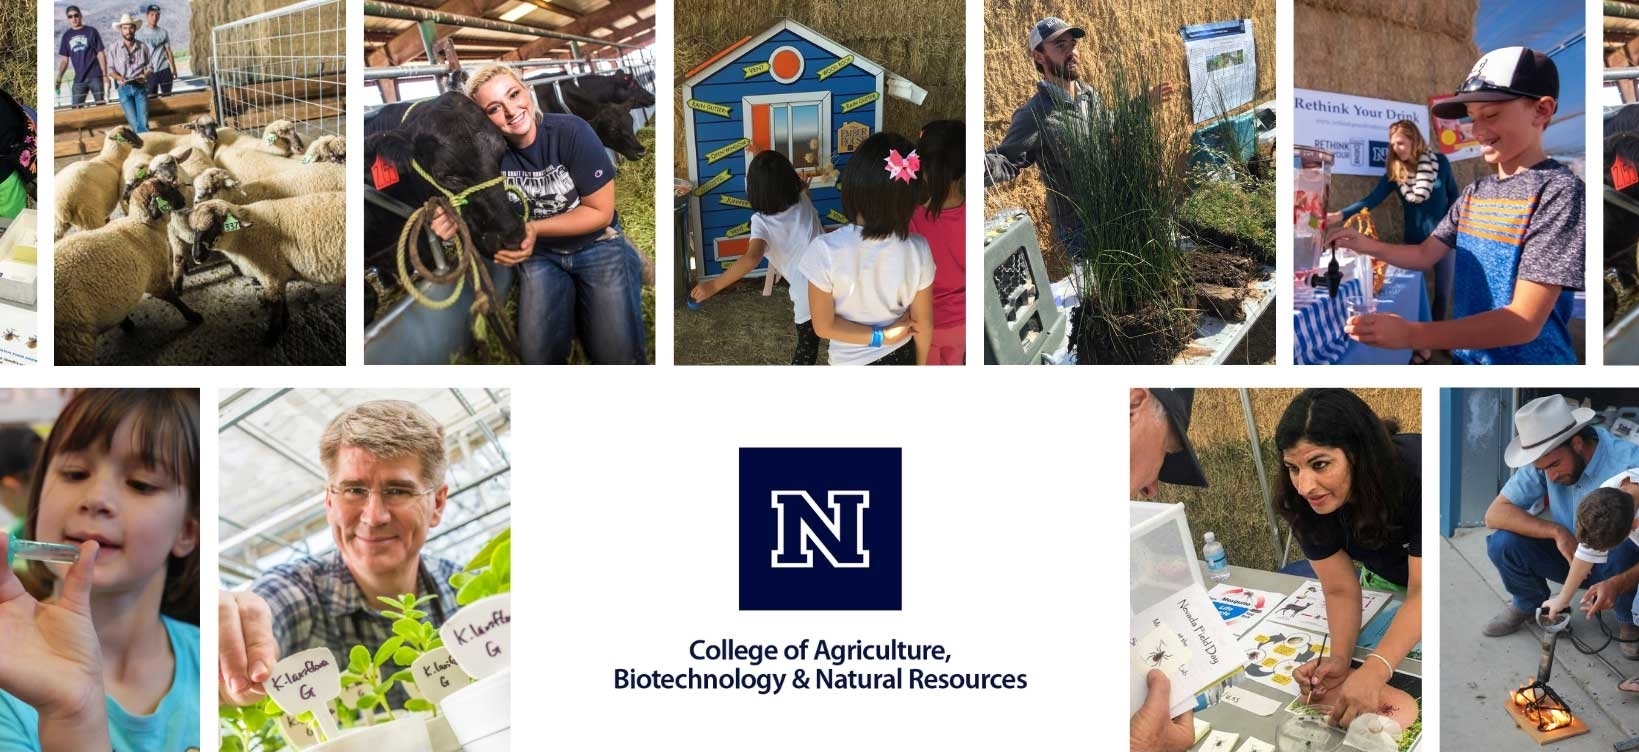 A collage of activities at Field Day, including livestock and greenhouse tours; plant sales; activities for kids, such as the Ember House game, Rethink Your Drink Nevada booth of delicious beverages that are healthy for kids, branding iron crafts, and science experiments; information from researchers on crop, tick and other research; and more.